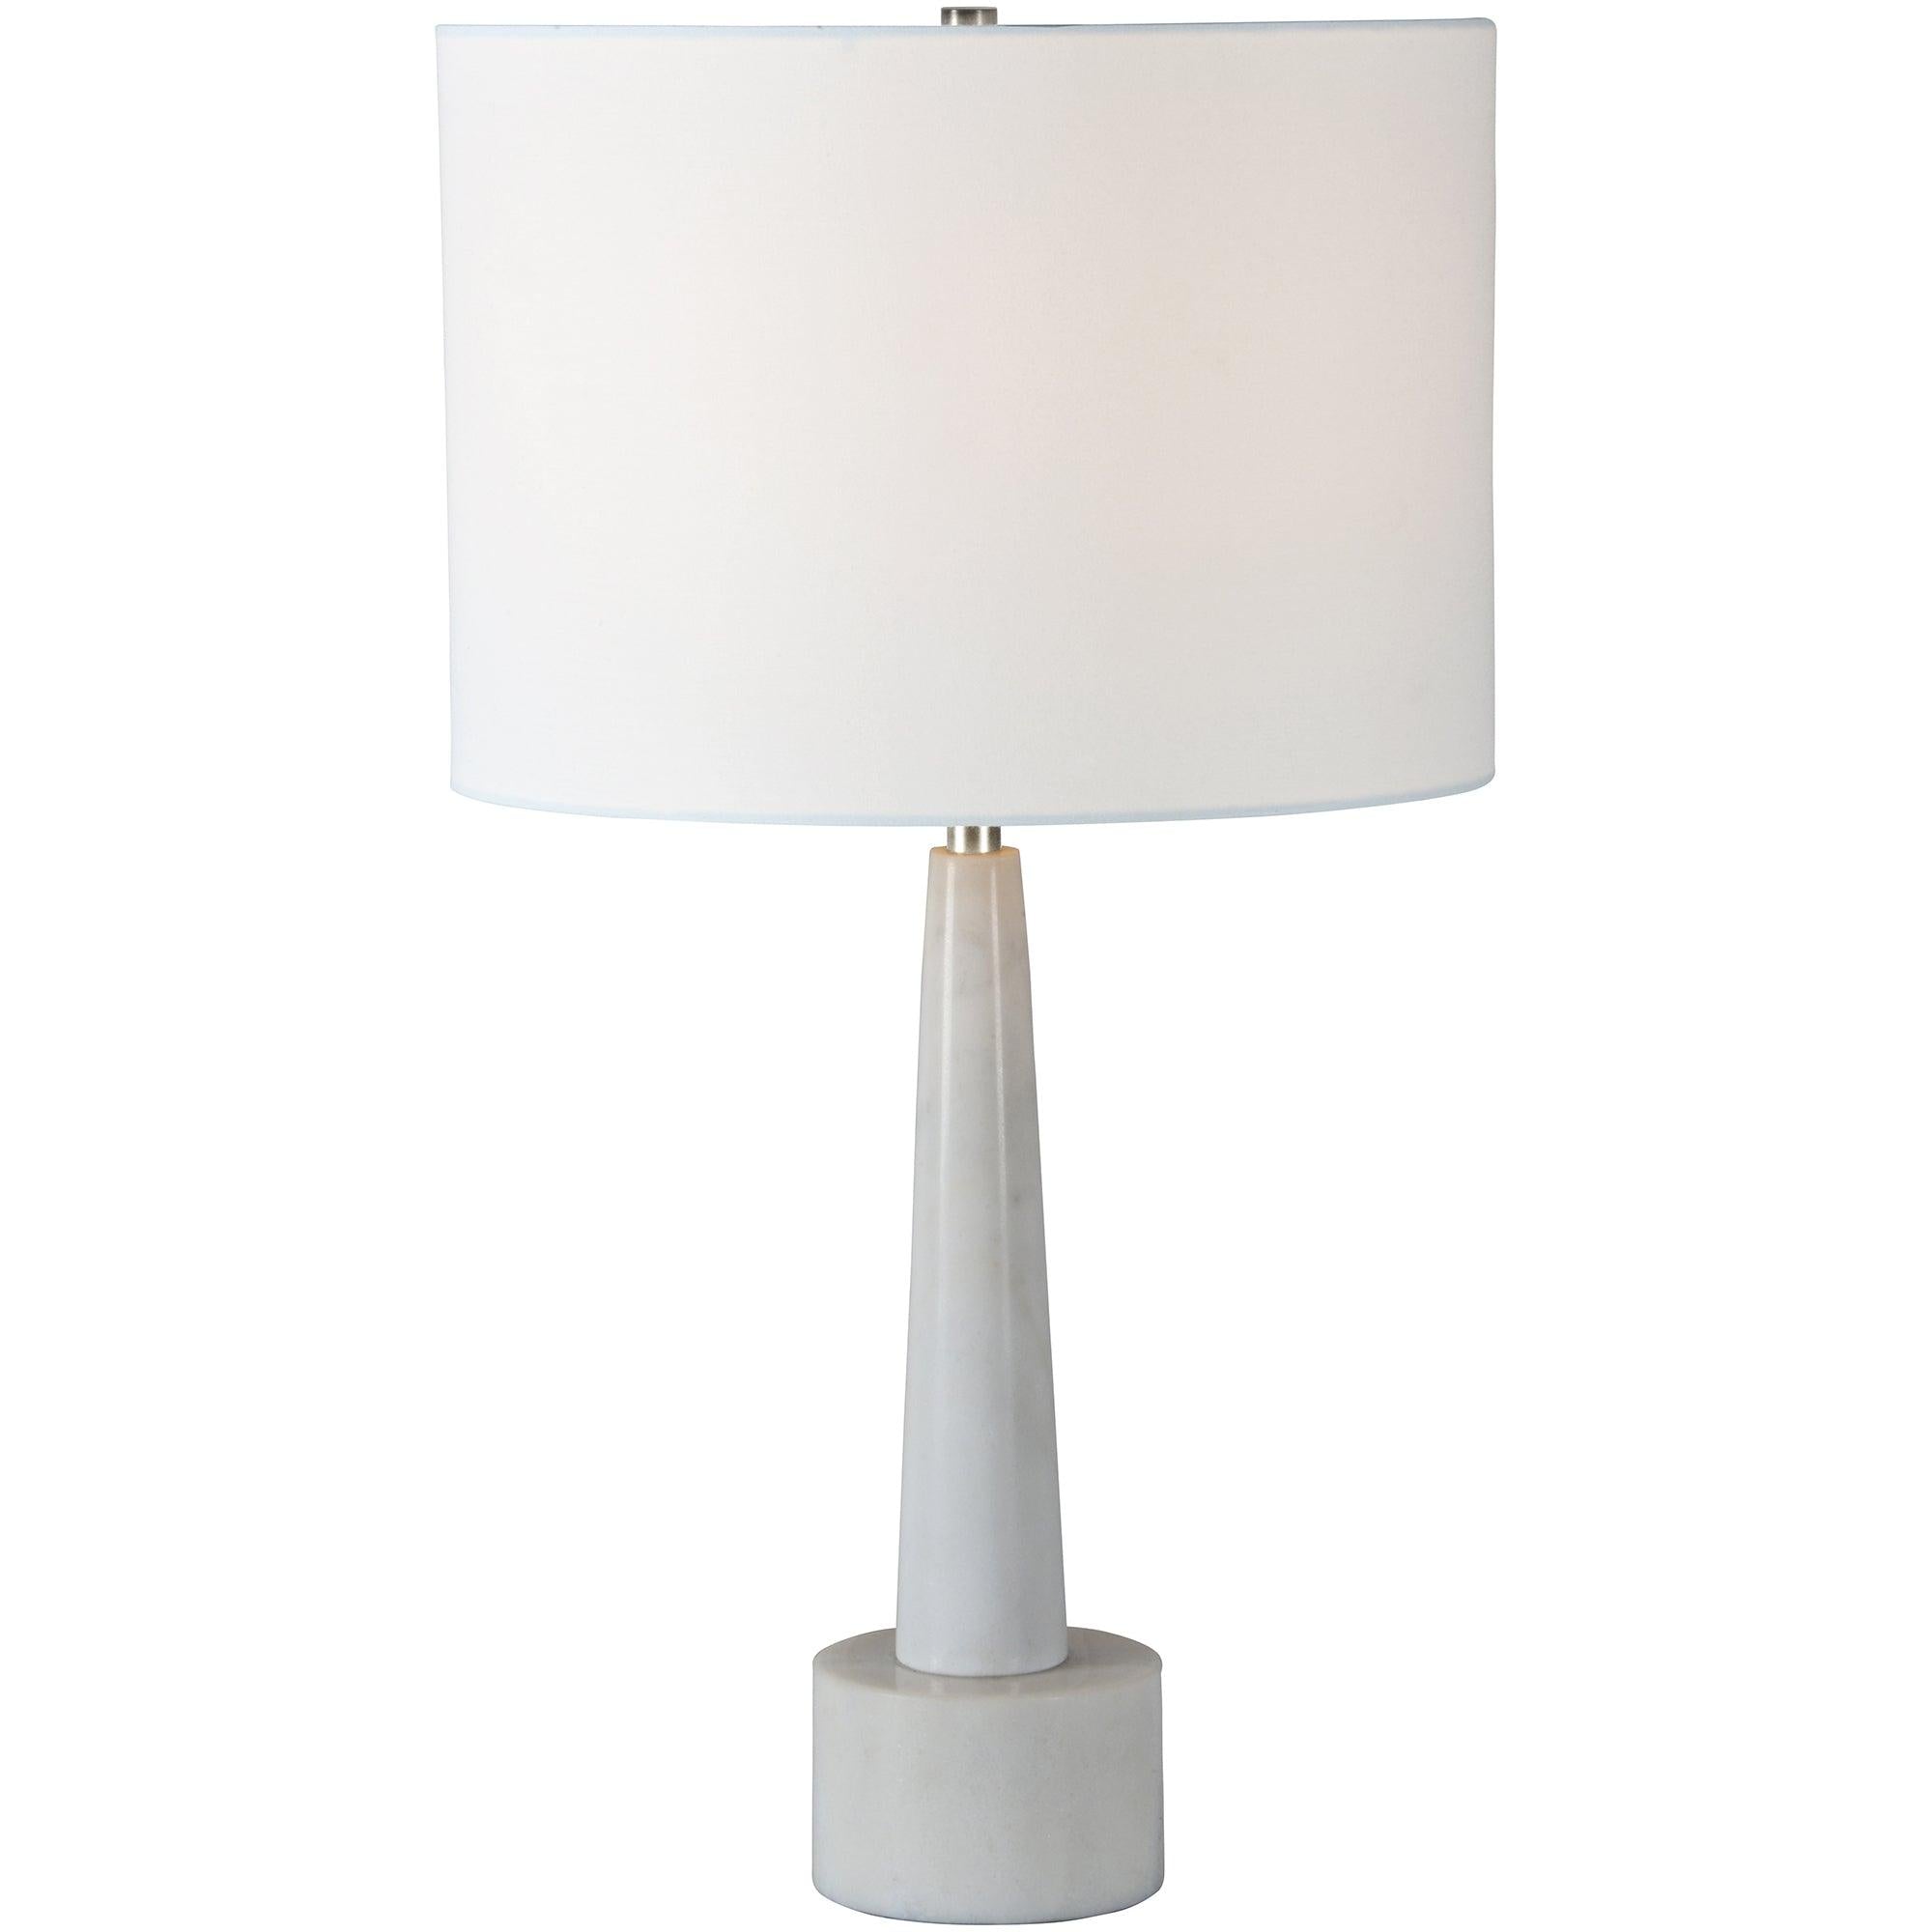 Normanton White Marble Table Lamp - Reimagine Designs - new, Table Lamp